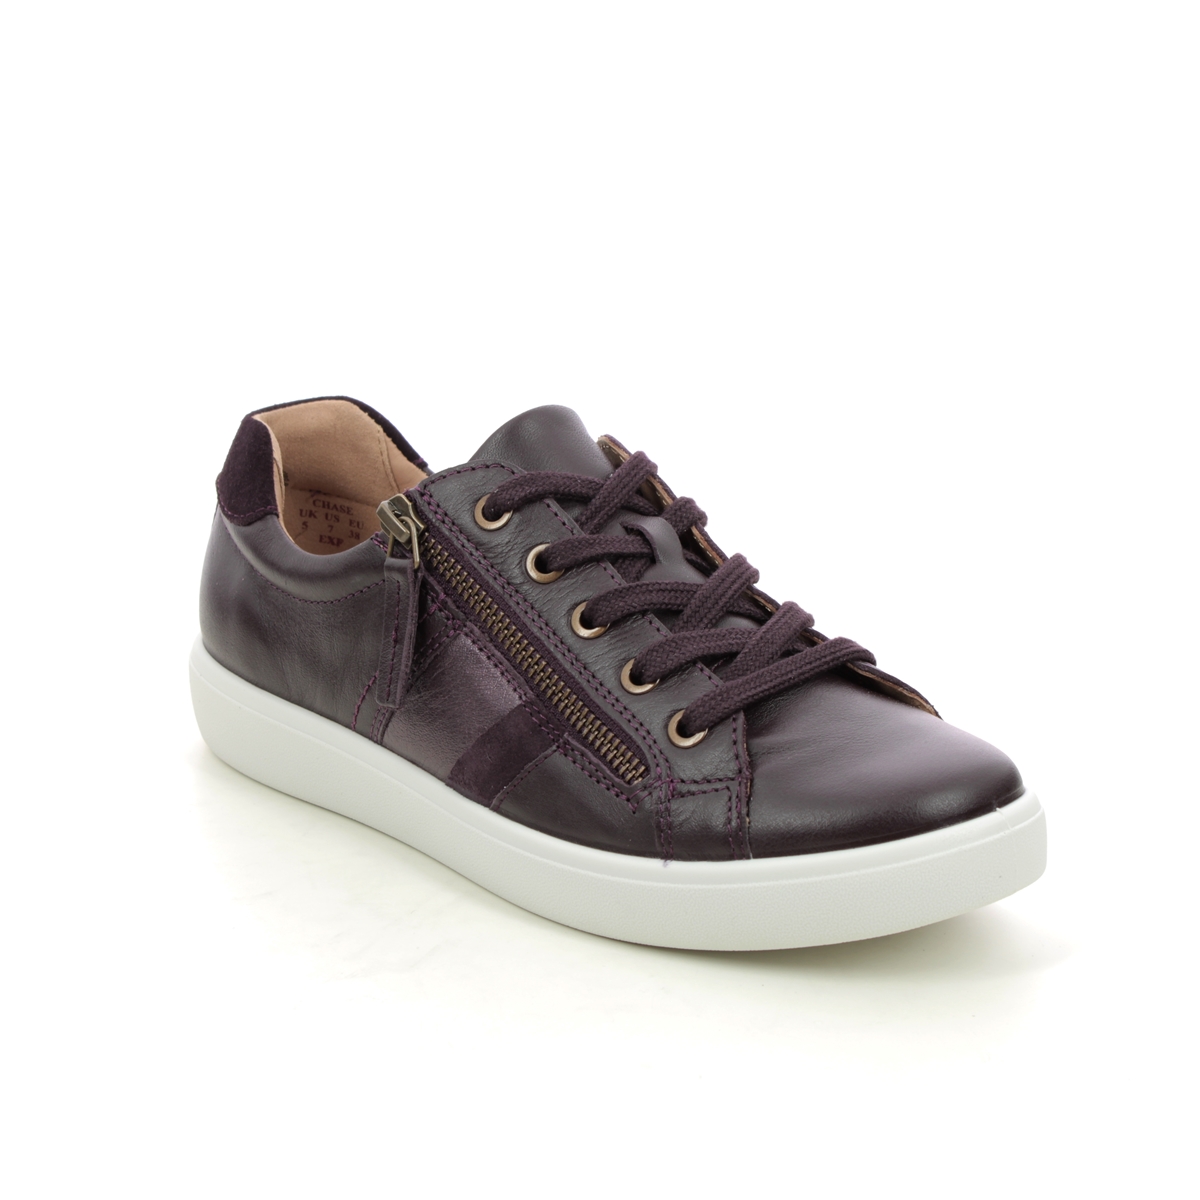 Hotter Chase 2 Wide PLUM Womens trainers 16112-90 in a Plain Leather in Size 4.5